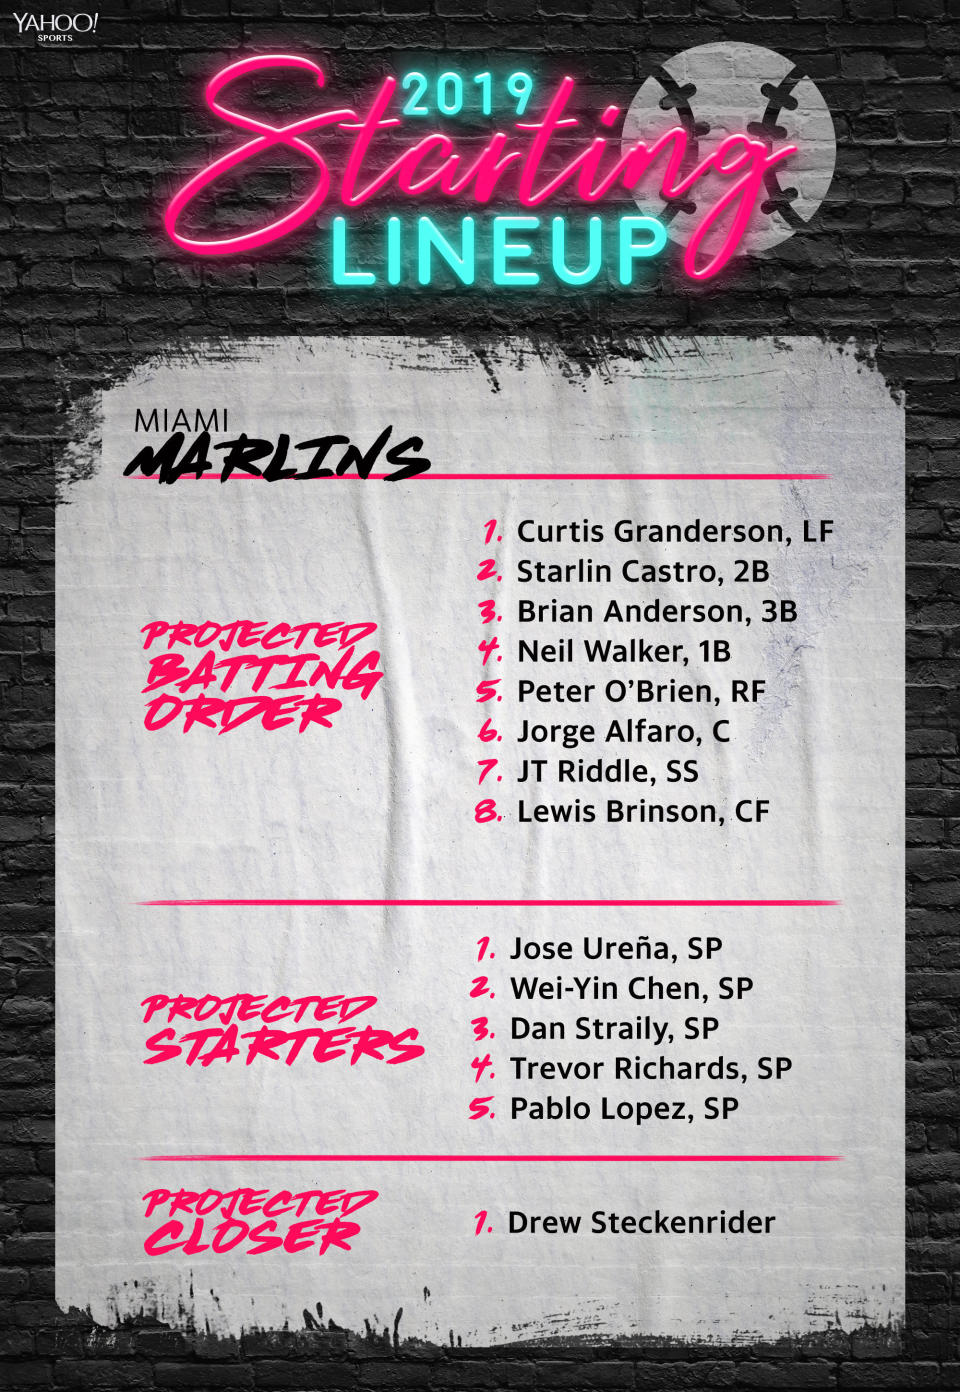 The Miami Marlines projected lineup and starting rotation for 2019. (Yahoo Sports)